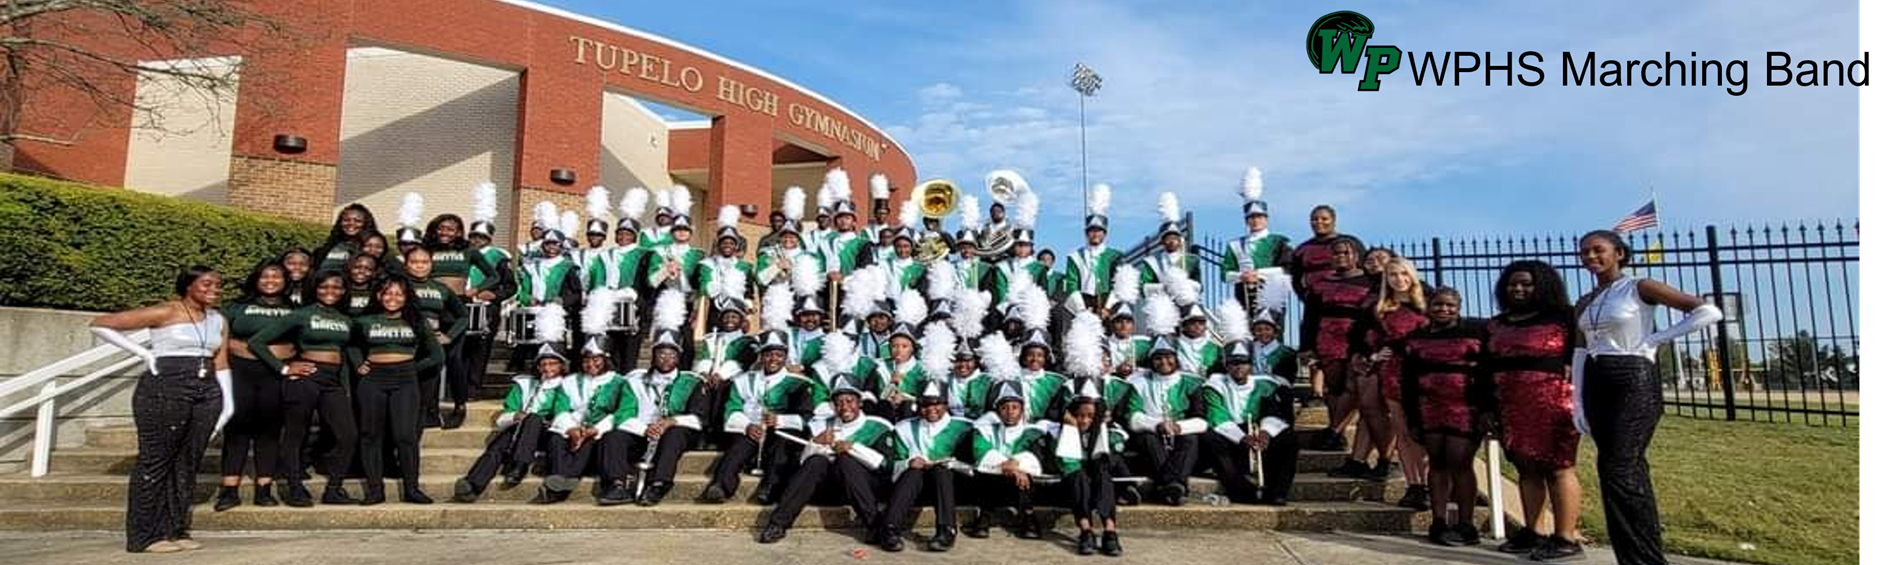 WPHS Marching Band